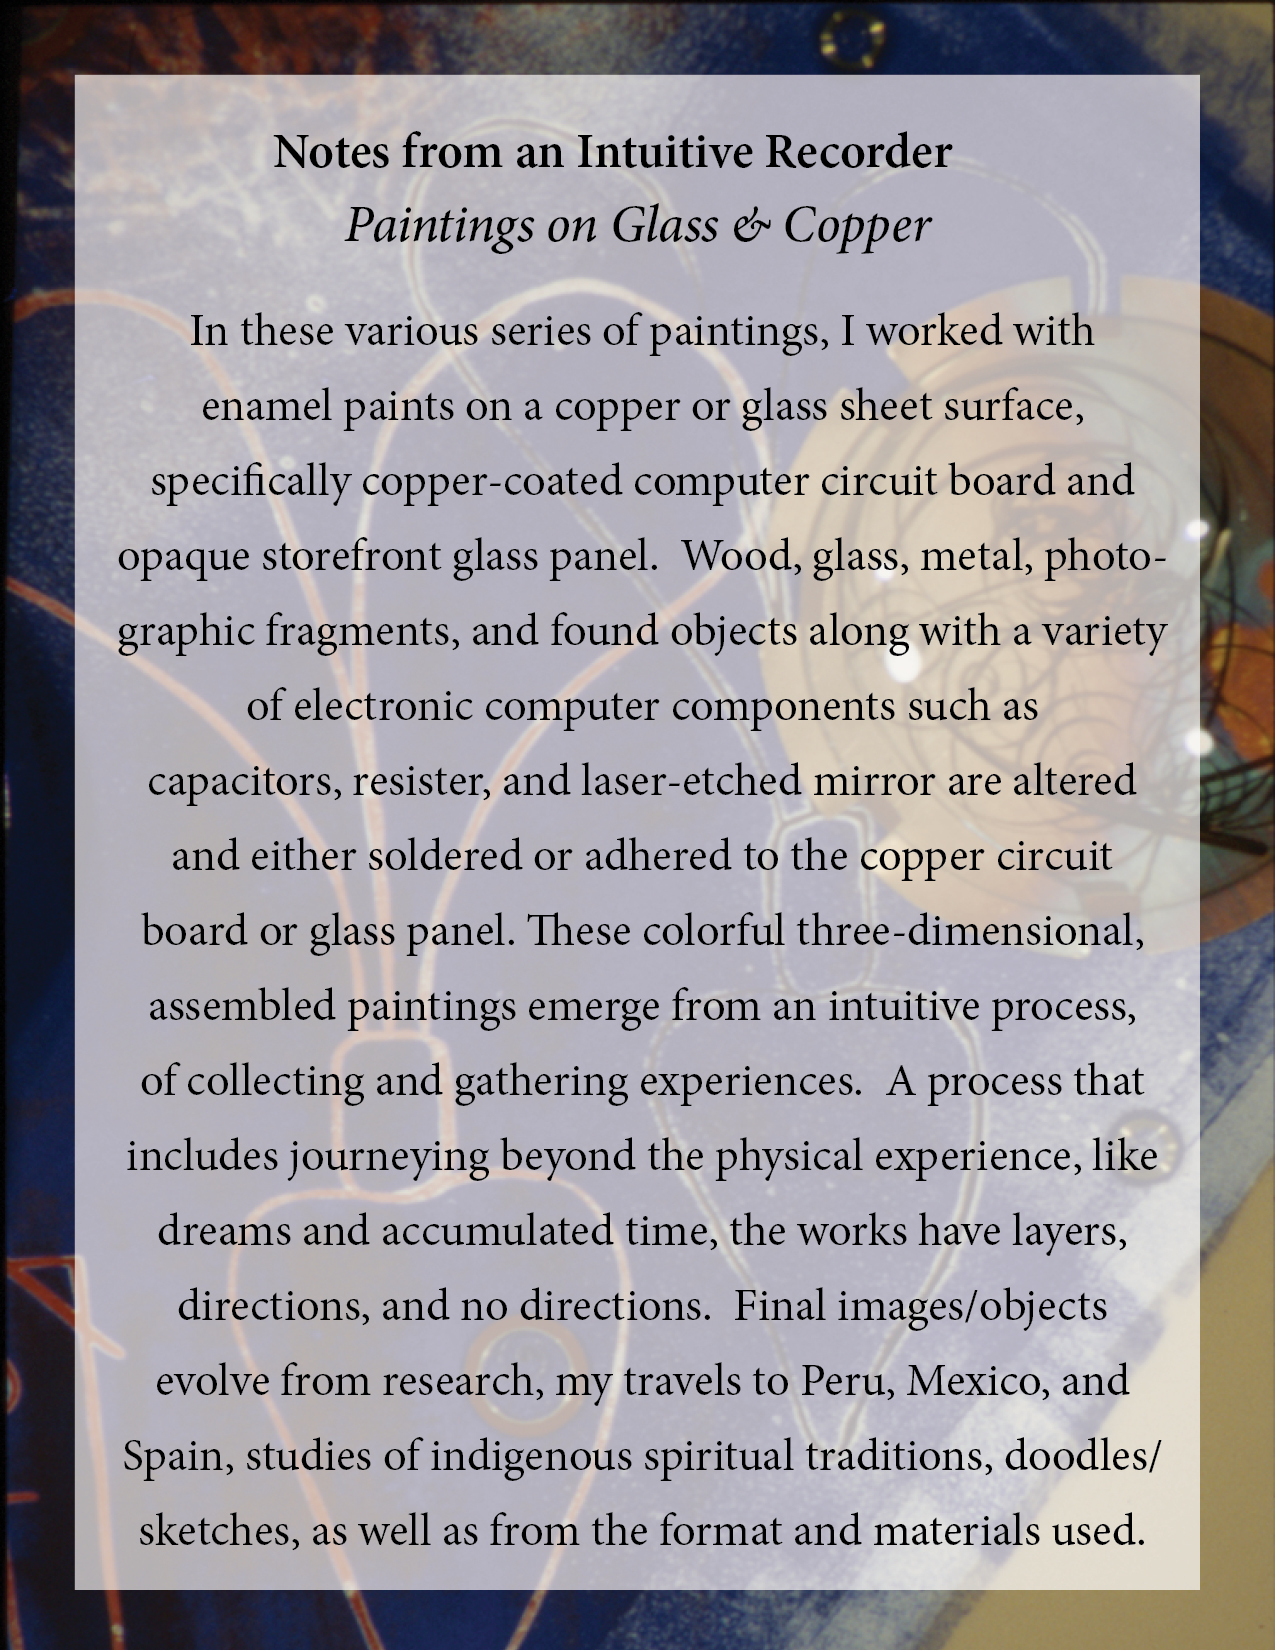 Paintings-Glass-Image&Text.jpg